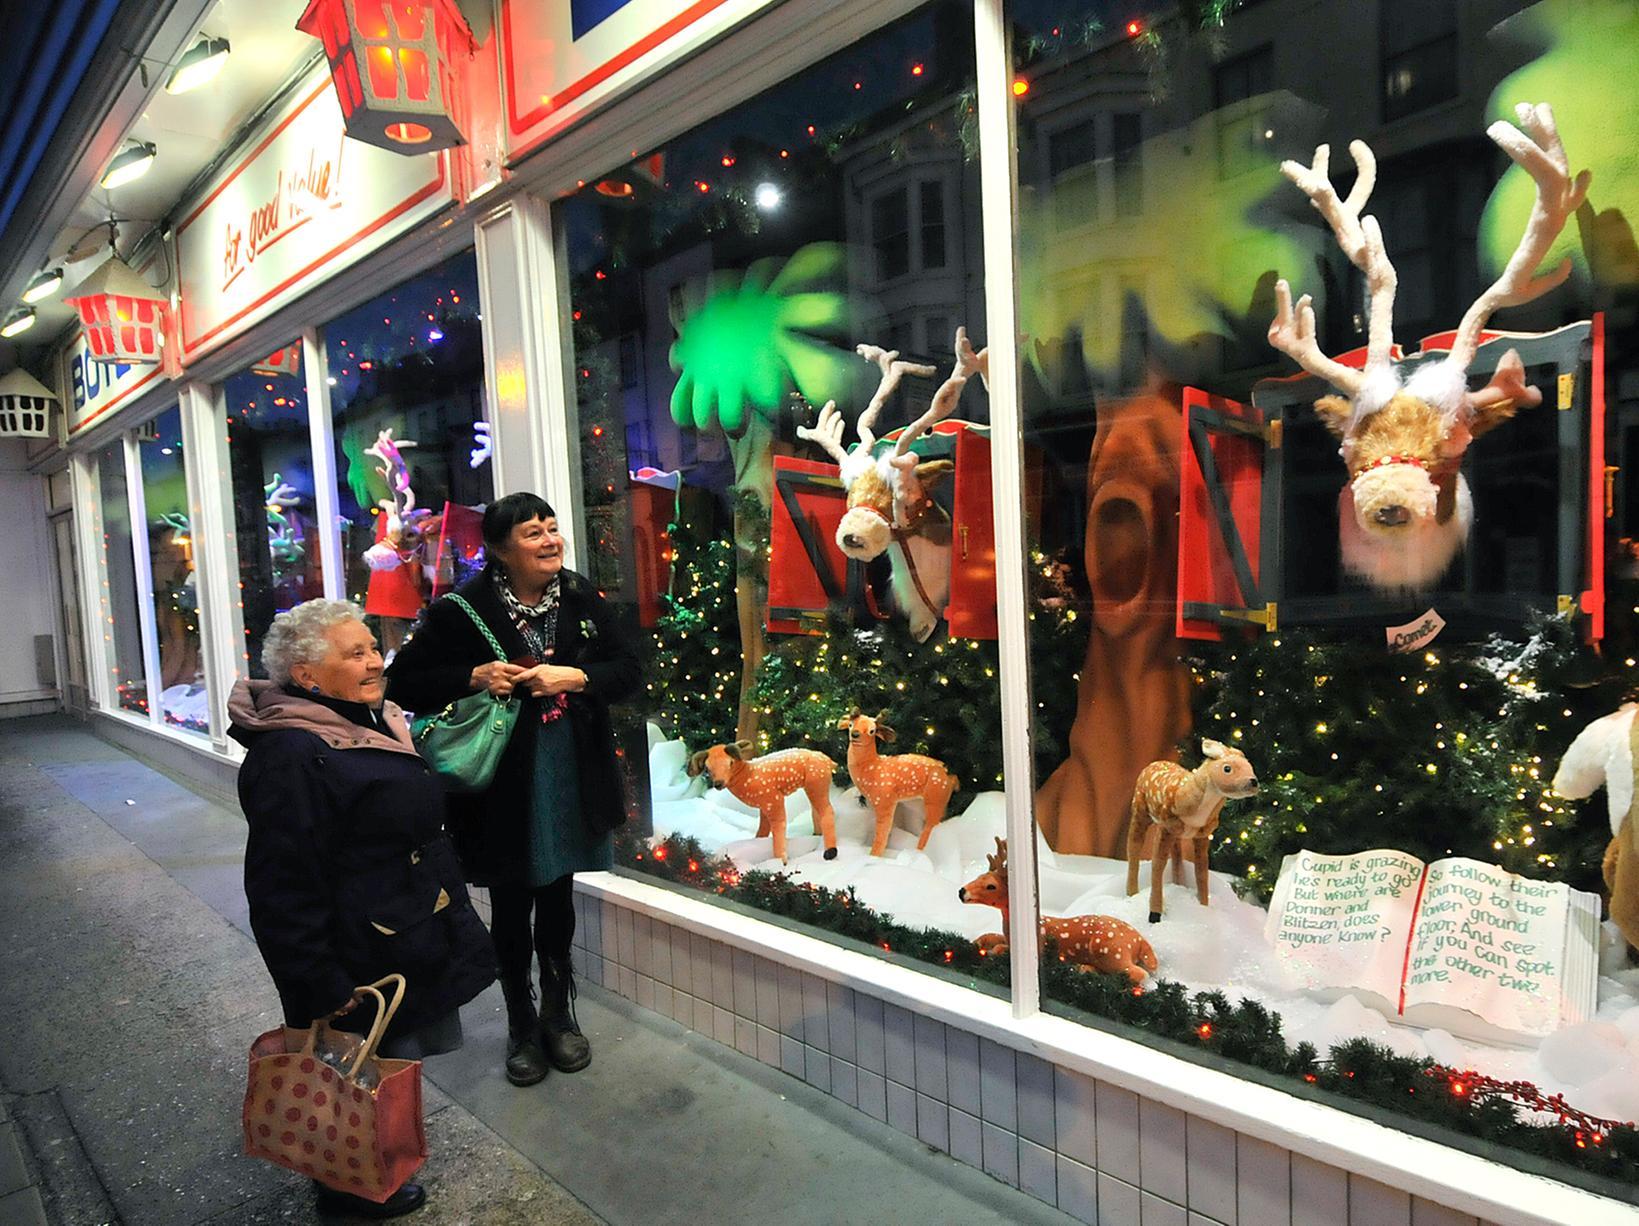 The reindeer's popped their heads out of their stables to say hello to shoppers in 2015.